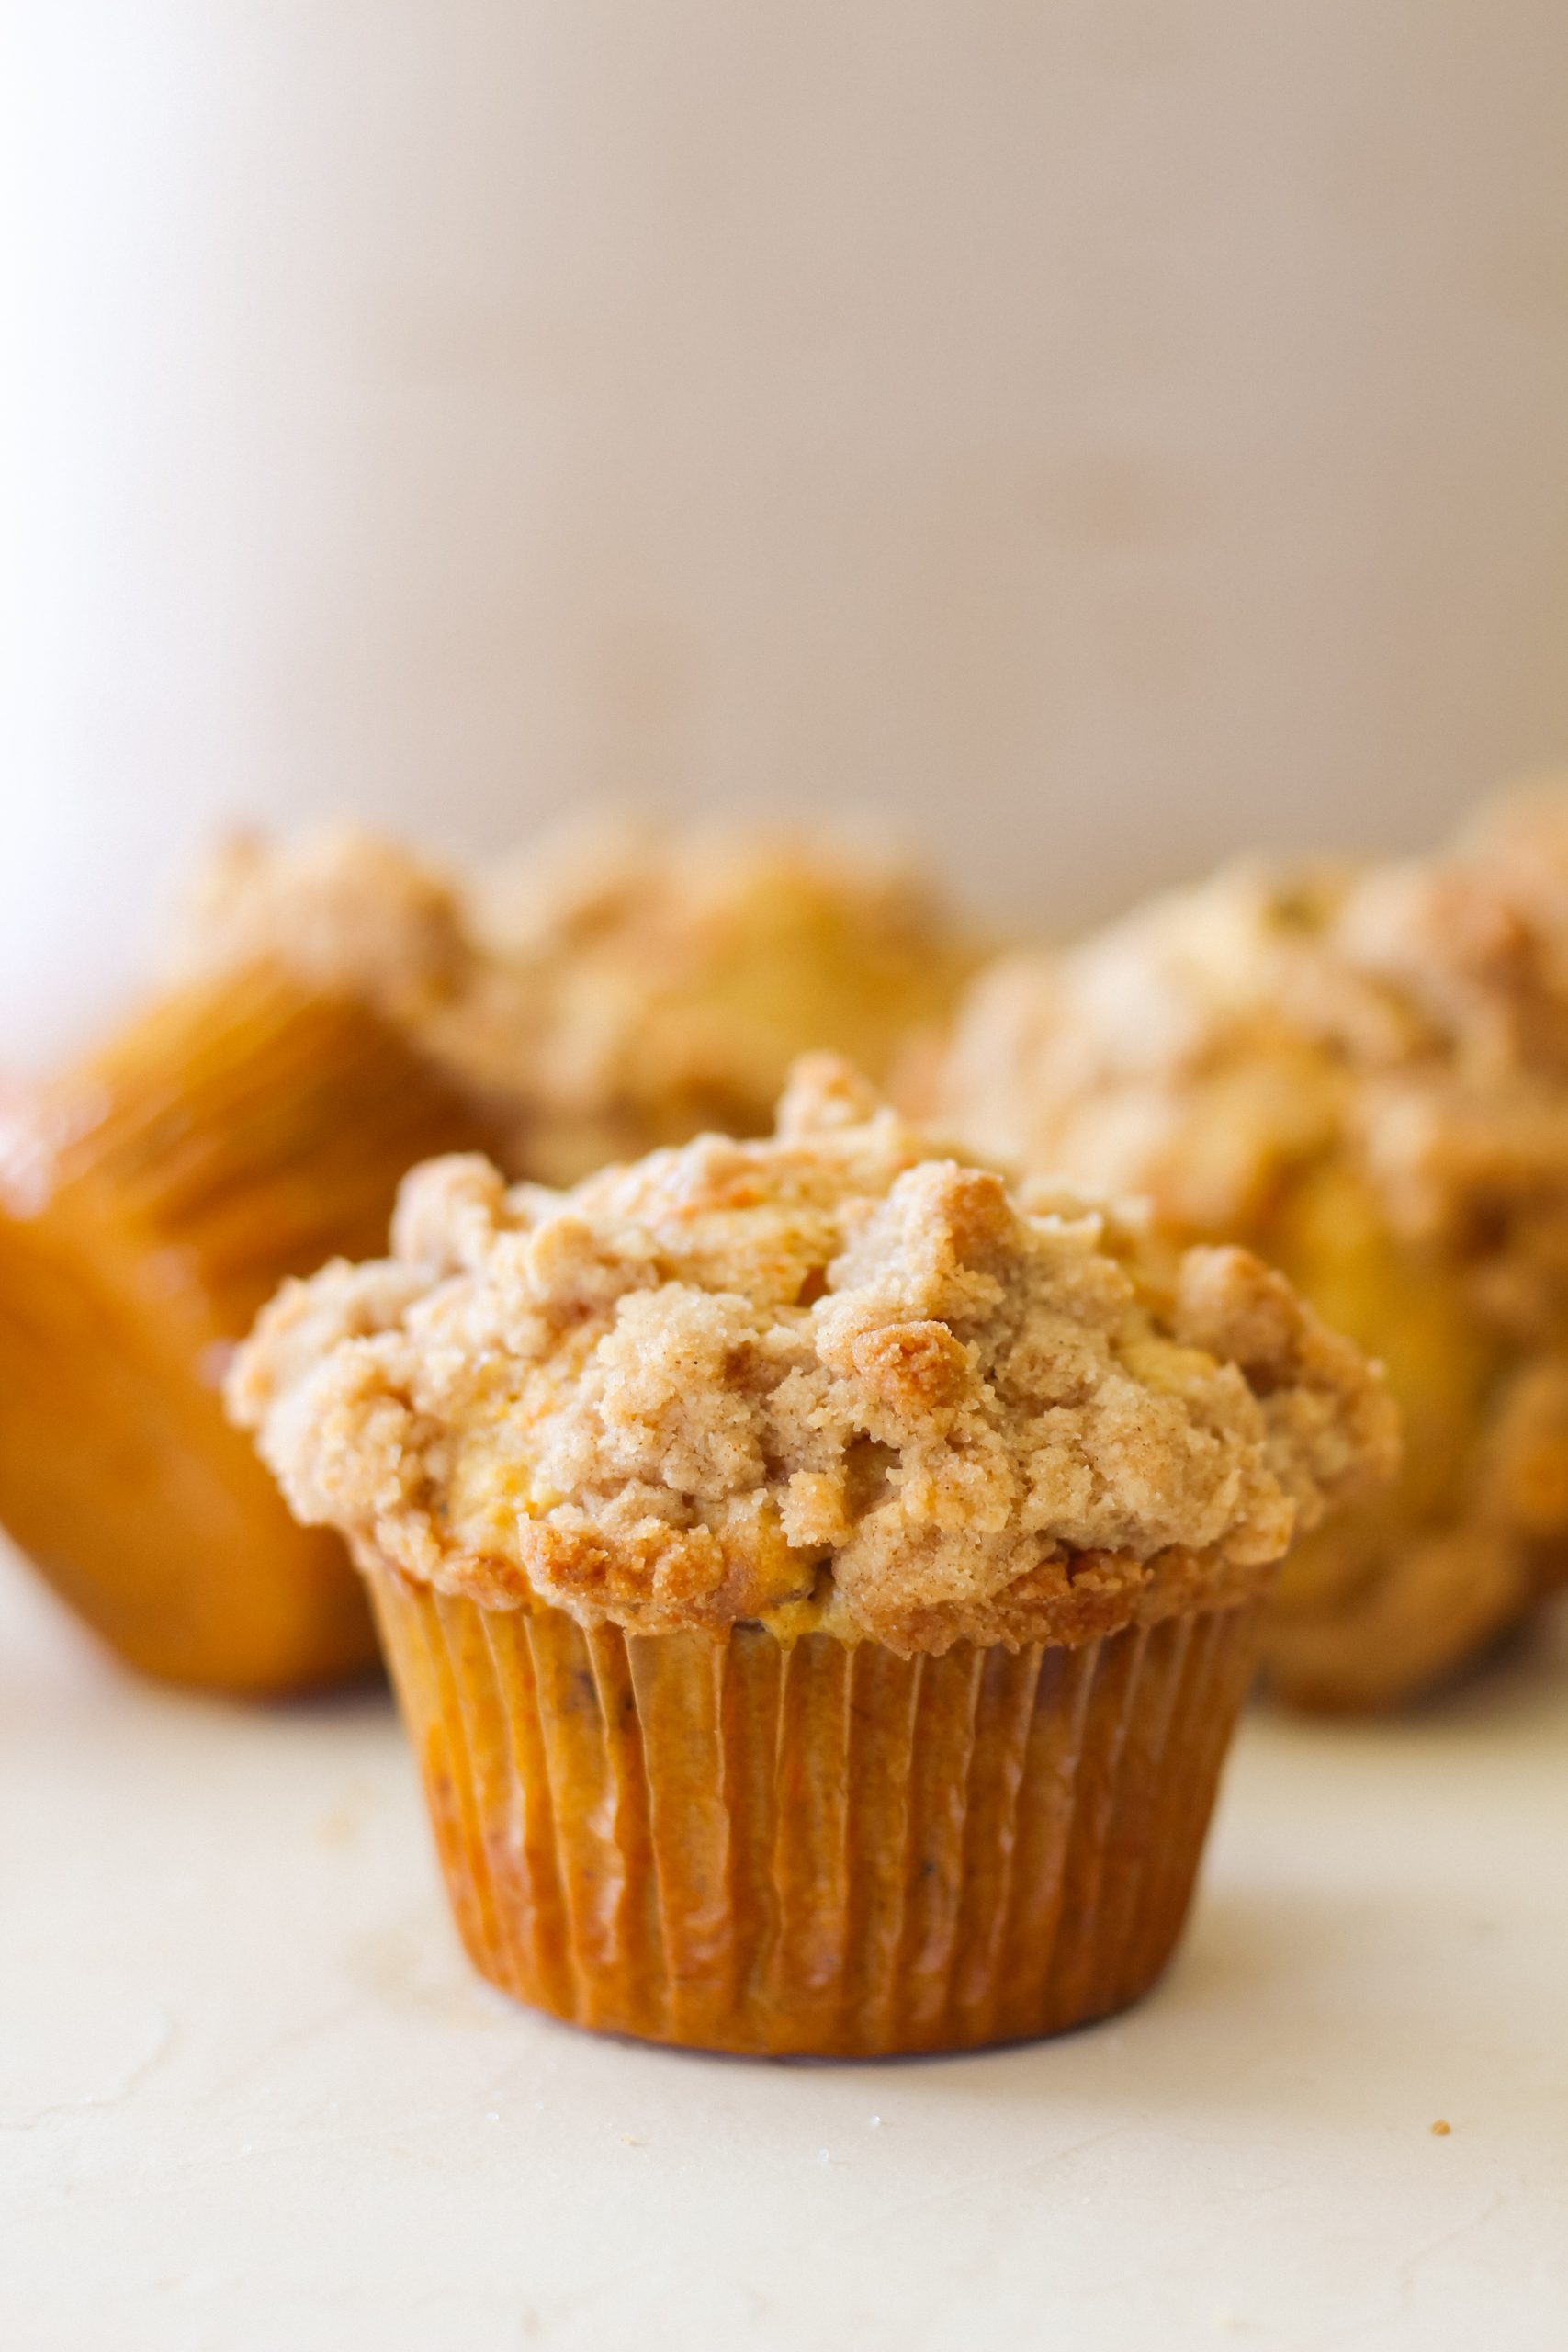 Carrot Cake Muffins with Cinnamon Streusel